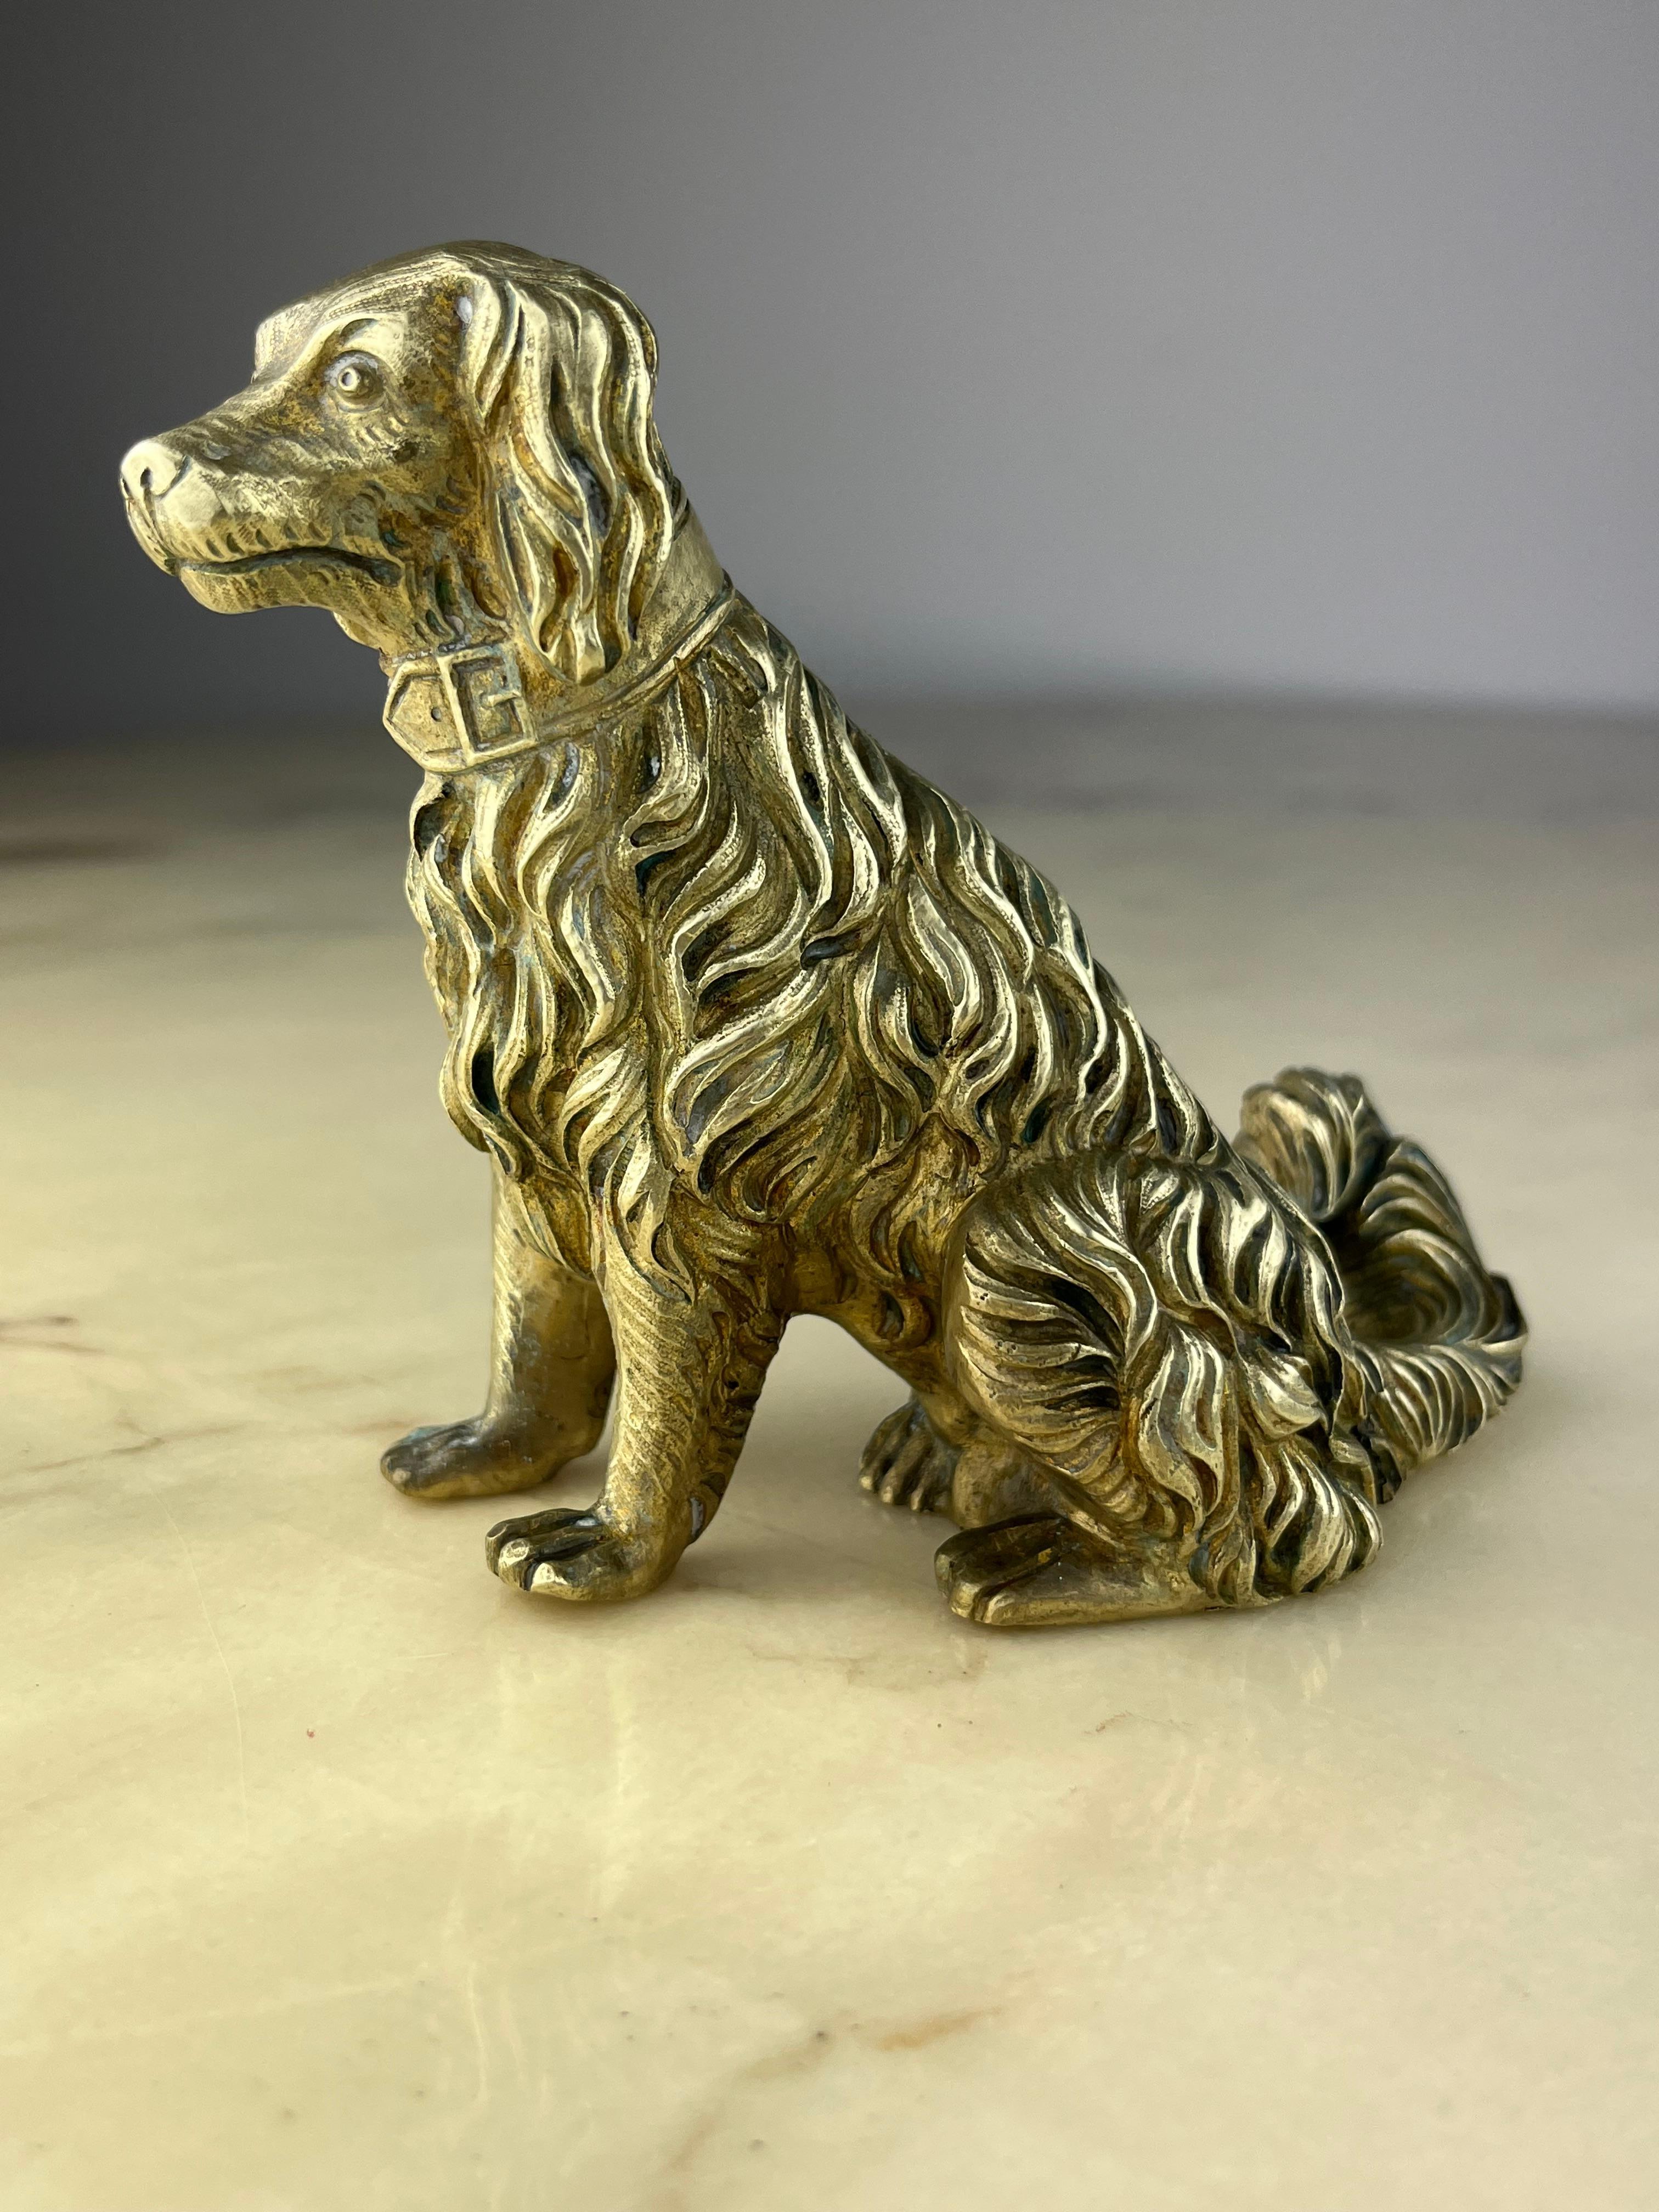 Mid-Century Brass dog, made in Italy, 1960s.
Great as a desk paperweight. Small signs of time and use. It has a small slit at the bottom.
Found in a noble apartment in the Sicilian hinterland-

We guarantee adequate packaging and will ship via DHL,